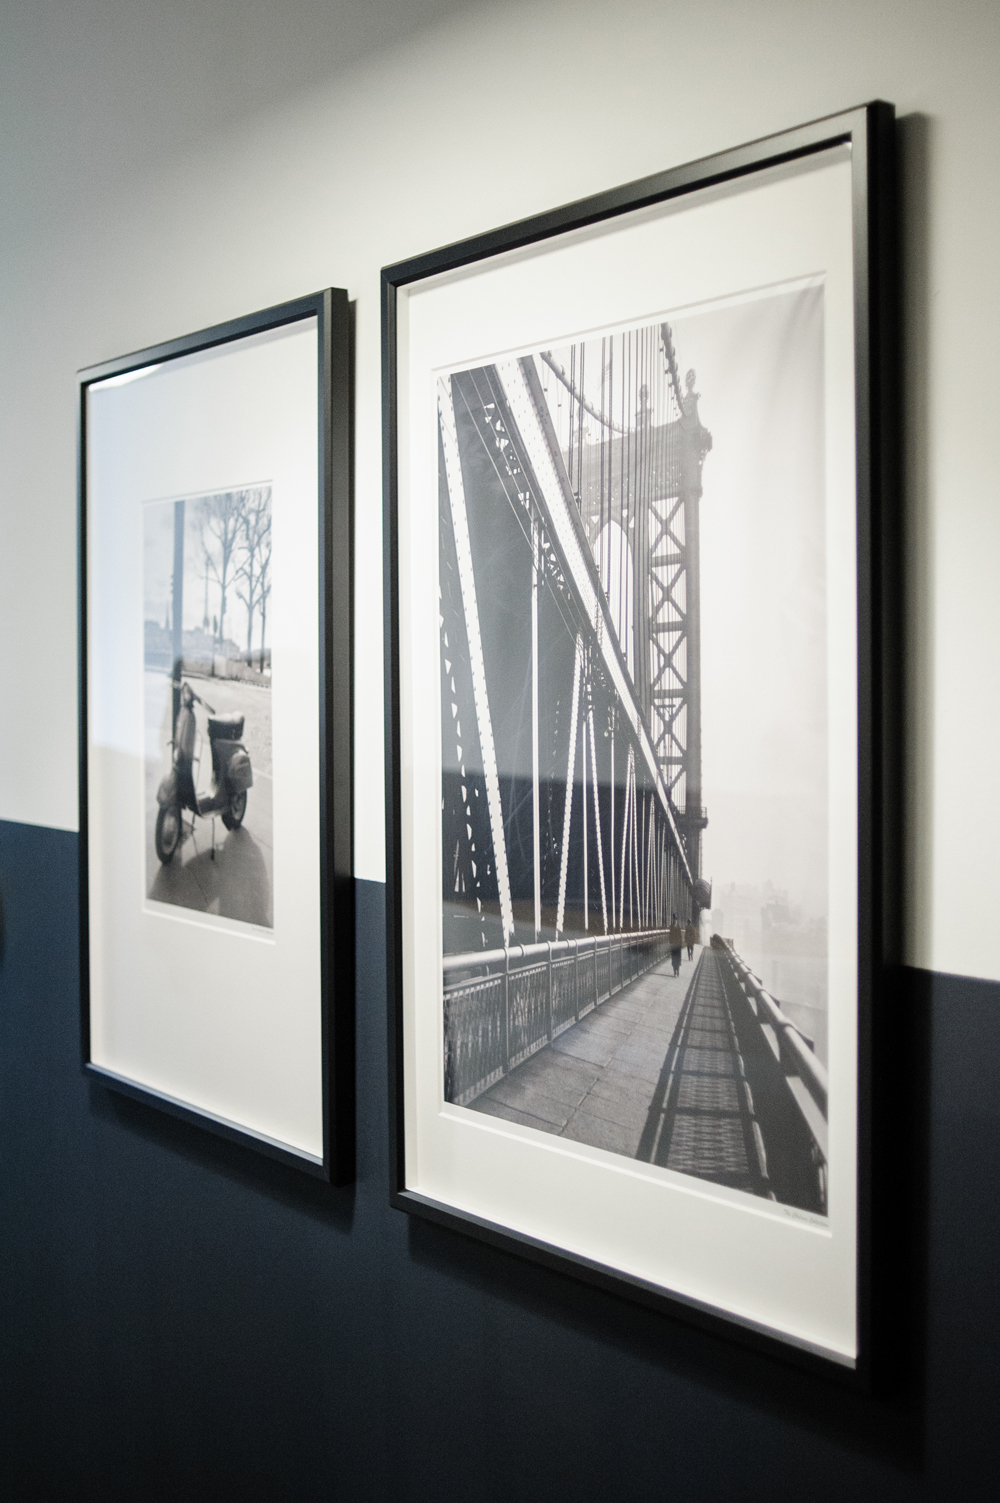 Black and white photography hung in the hallway